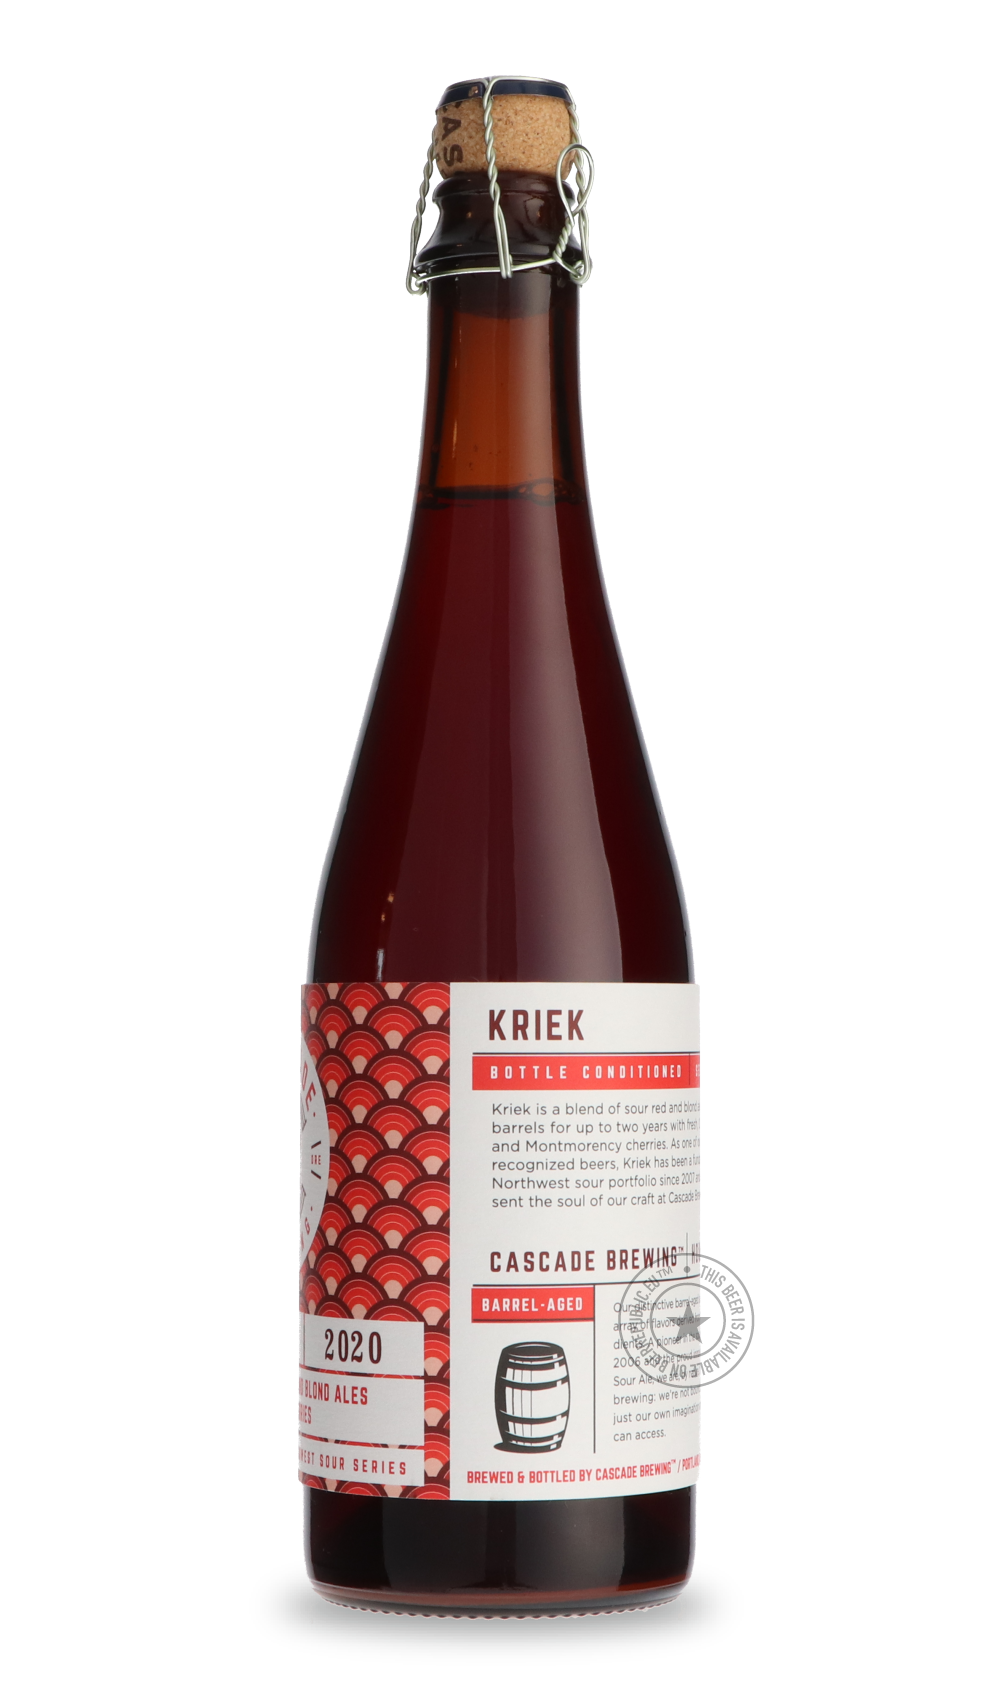 -Cascade- Kriek-Sour / Wild & Fruity- Only @ Beer Republic - The best online beer store for American & Canadian craft beer - Buy beer online from the USA and Canada - Bier online kopen - Amerikaans bier kopen - Craft beer store - Craft beer kopen - Amerikanisch bier kaufen - Bier online kaufen - Acheter biere online - IPA - Stout - Porter - New England IPA - Hazy IPA - Imperial Stout - Barrel Aged - Barrel Aged Imperial Stout - Brown - Dark beer - Blond - Blonde - Pilsner - Lager - Wheat - Weizen - Amber - 